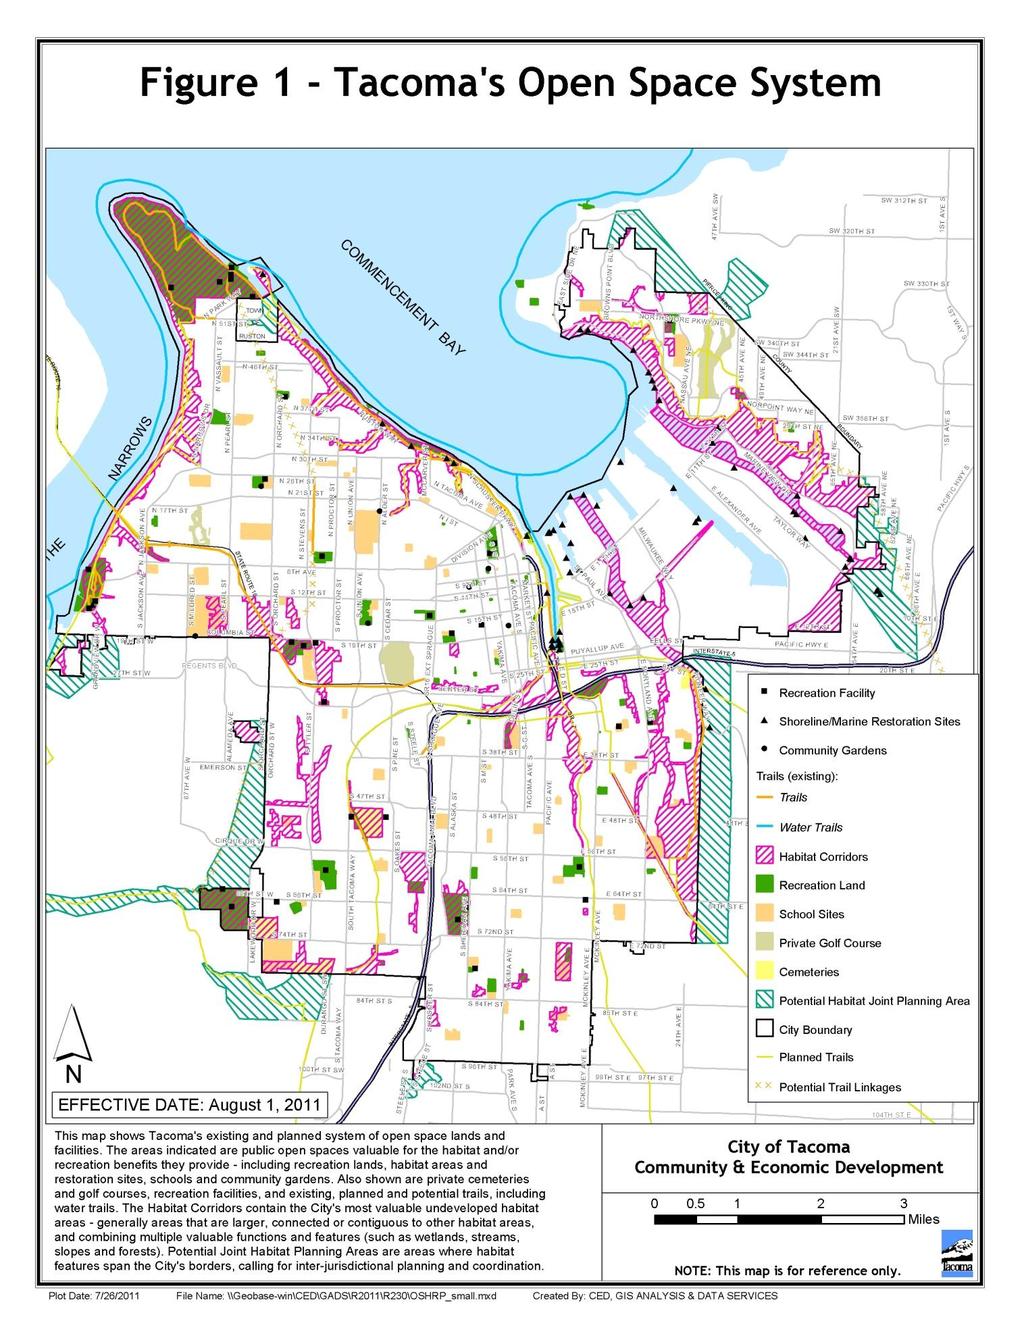 Open Space Habitat and Recreation Element City of Tacoma Comprehensive